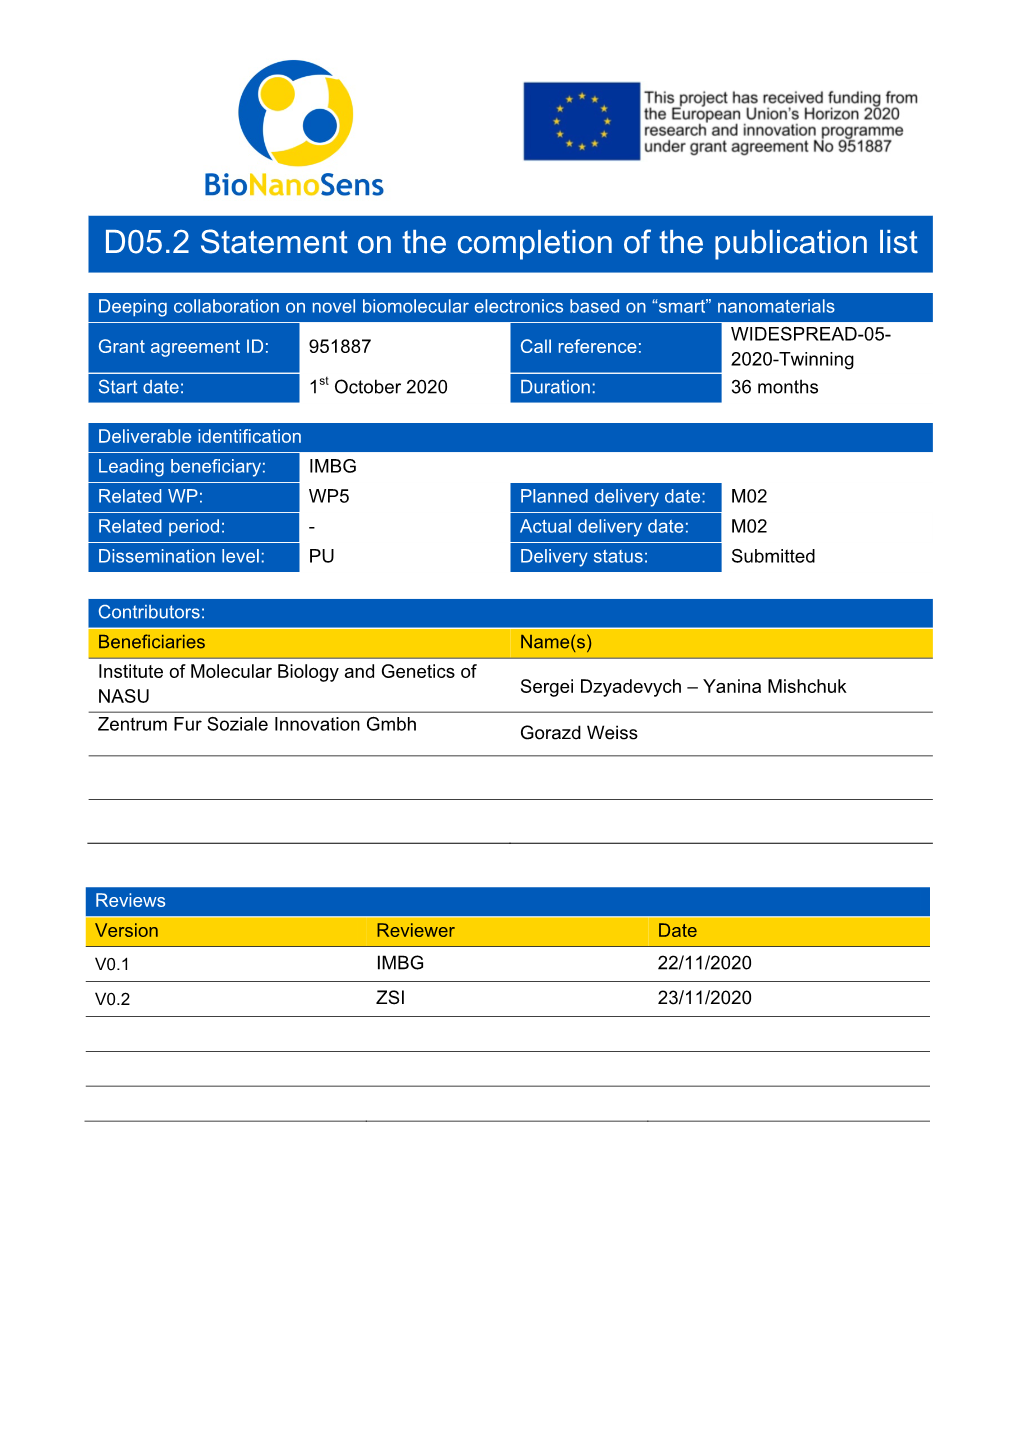 D05.2 Statement on the Completion of the Publication List